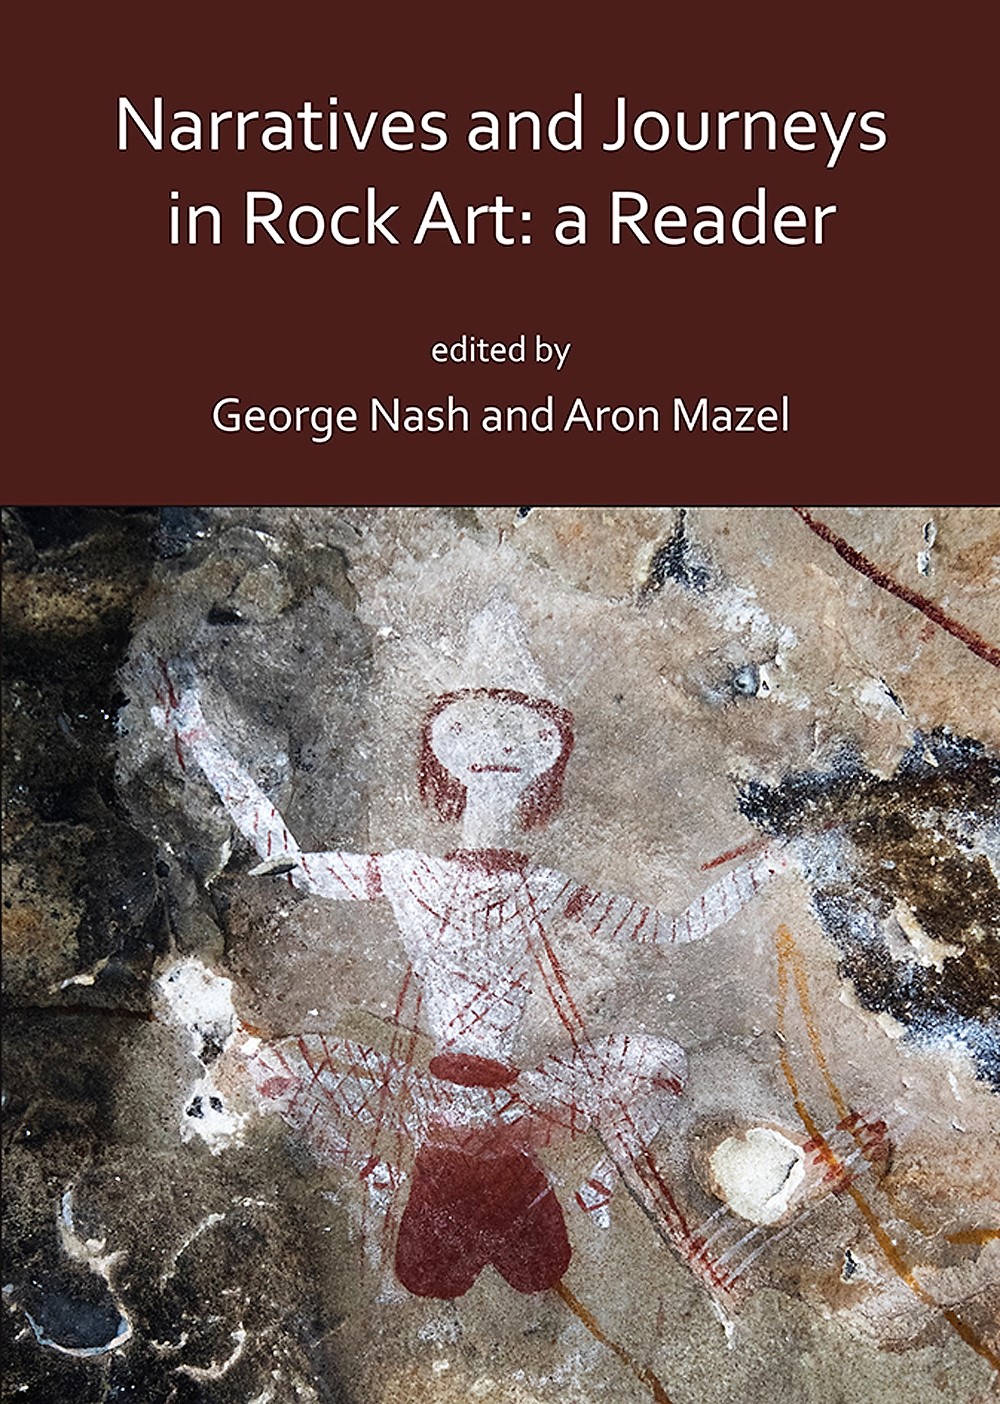 Narratives and Journeys in Rock Art: A Reader edited by George Nash and Aron Mazel 